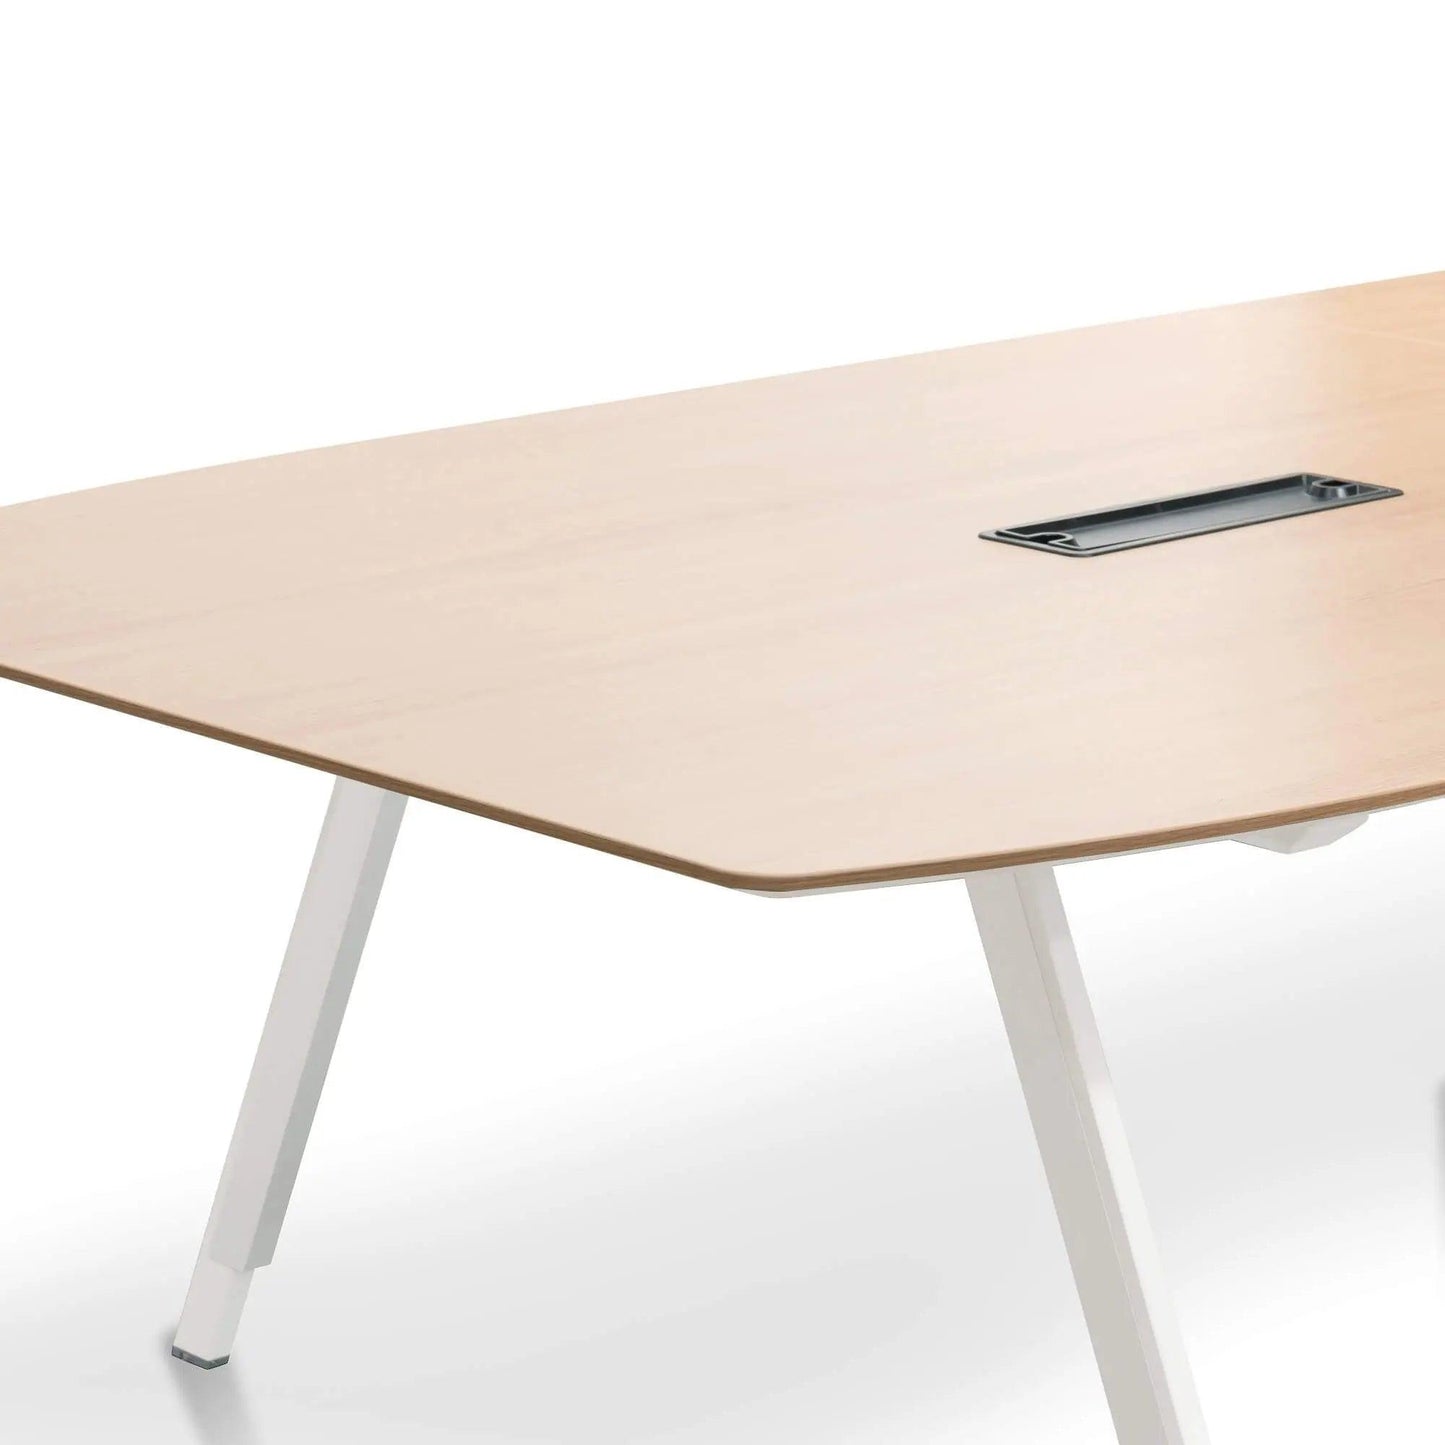 Calibre Boardroom Meeting Table - Natural OT2500-SN - Office DesksOT2500-SN 4